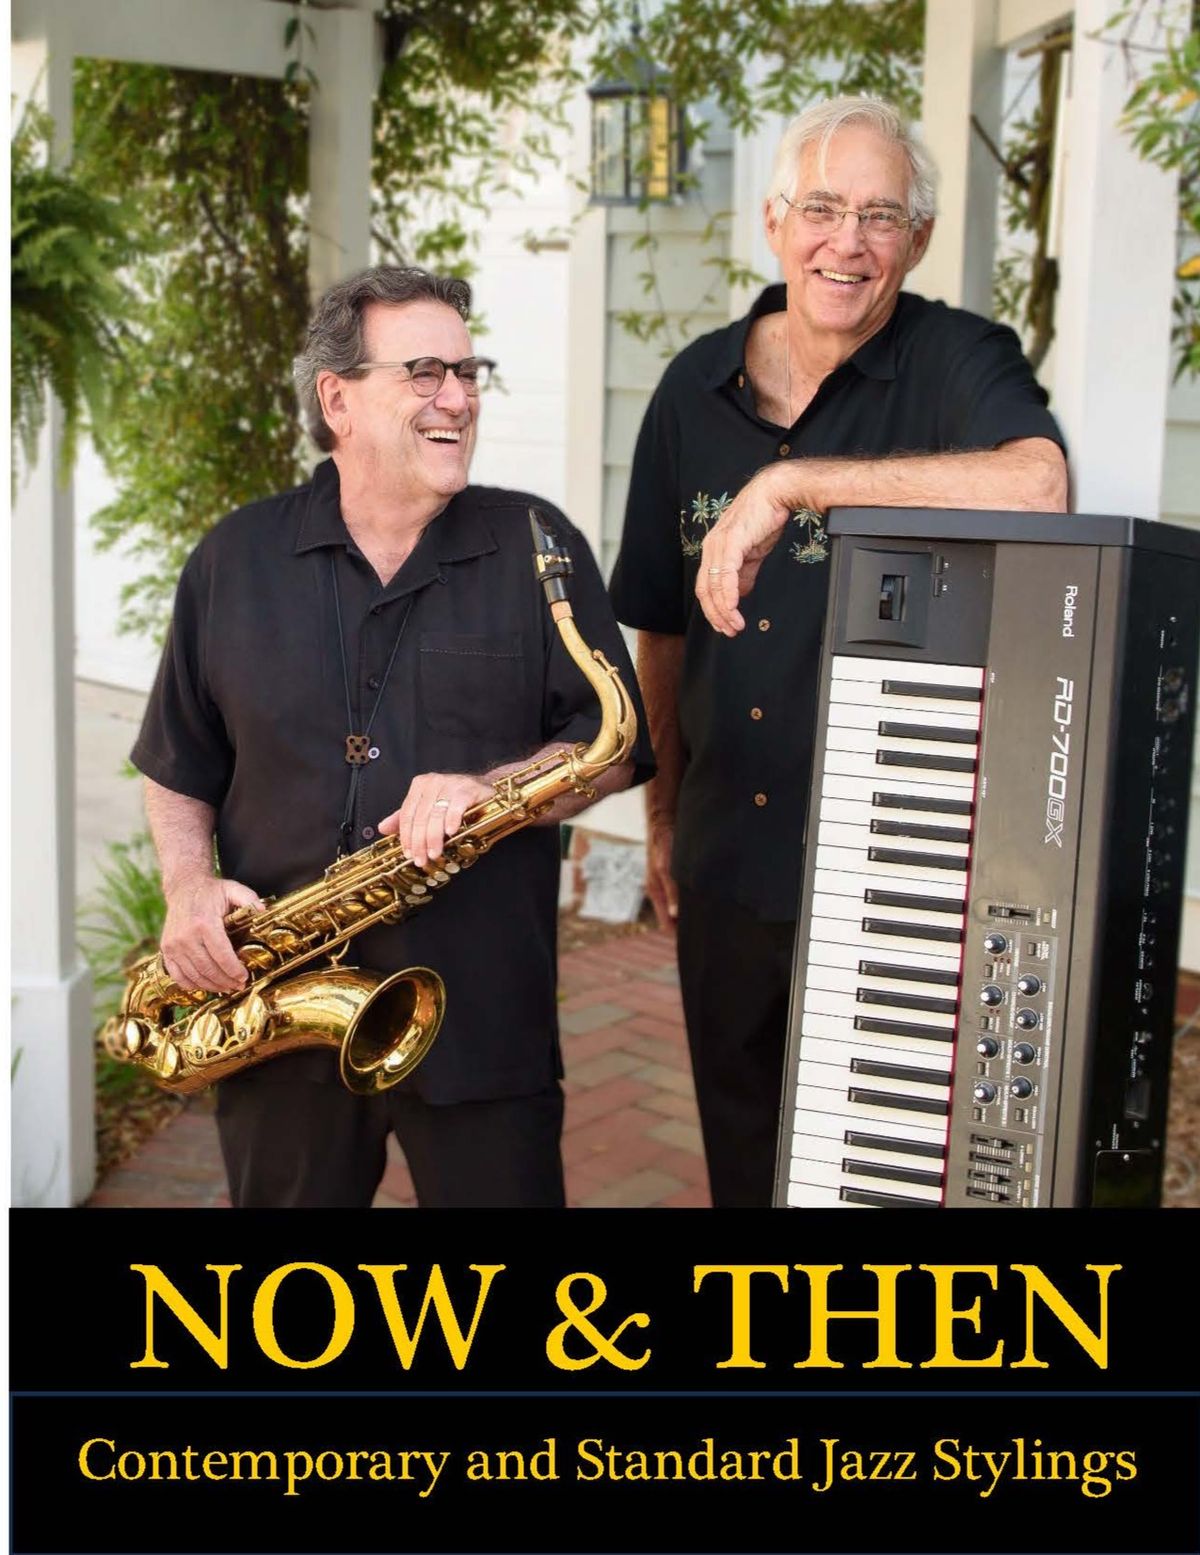 Live Music & Brunch with Now & Then Jazz Duo